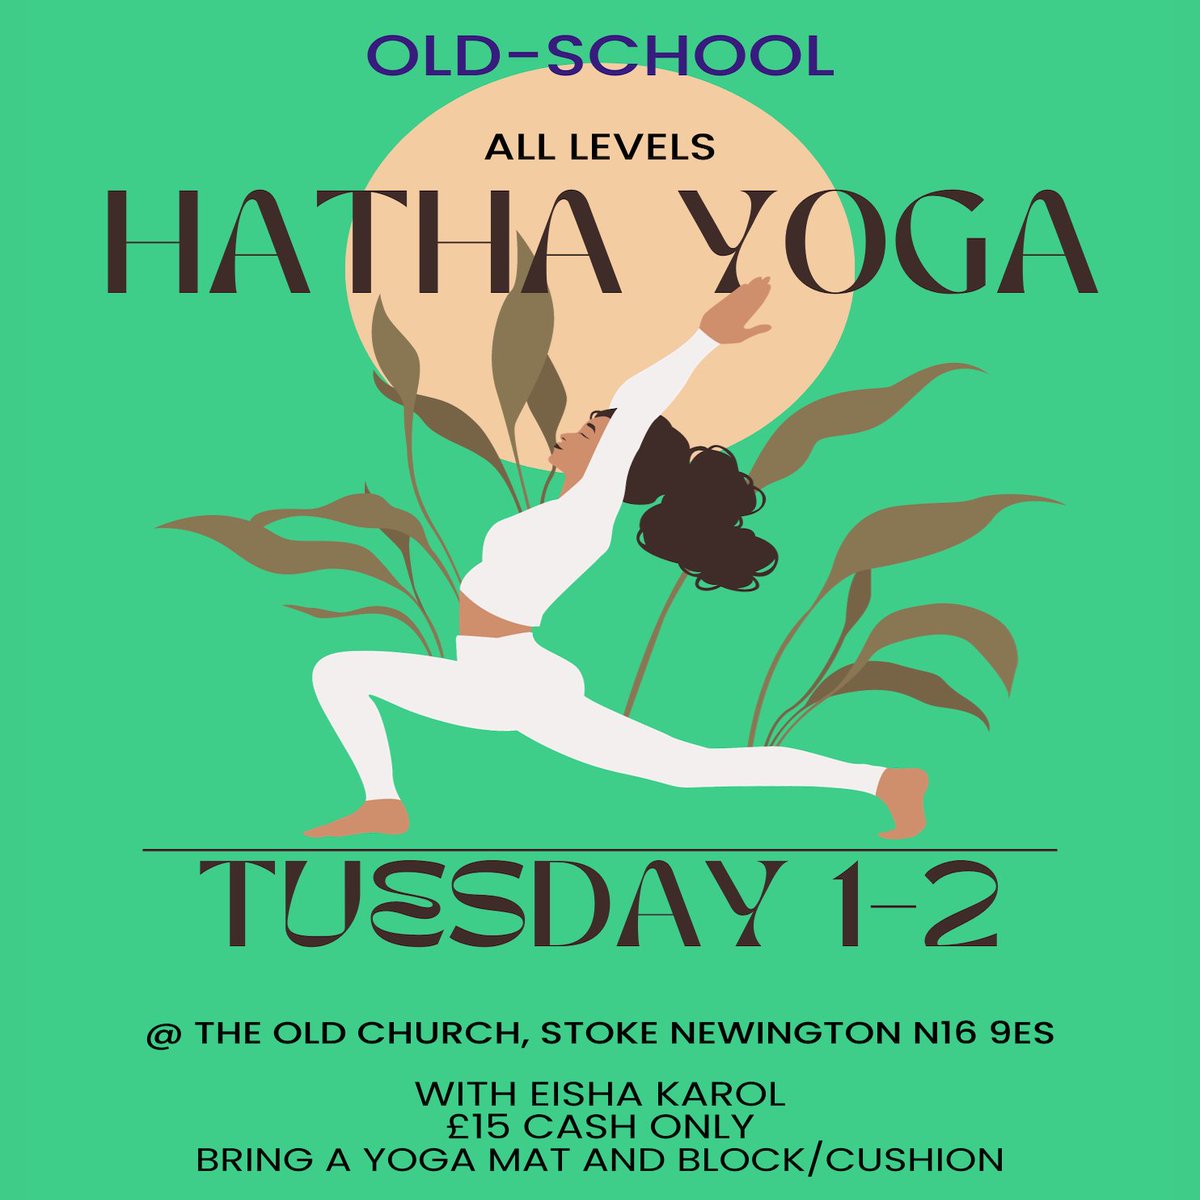 Still lumbered with that Monday energy? Join us at 1pm every Tuesday for Hatha Yoga with instructor Eisha Karol. It's £15 on the door, so just bring yourself, a mat and a block or cushion. We'll see you there! theoldchurch.org.uk/event-details/…